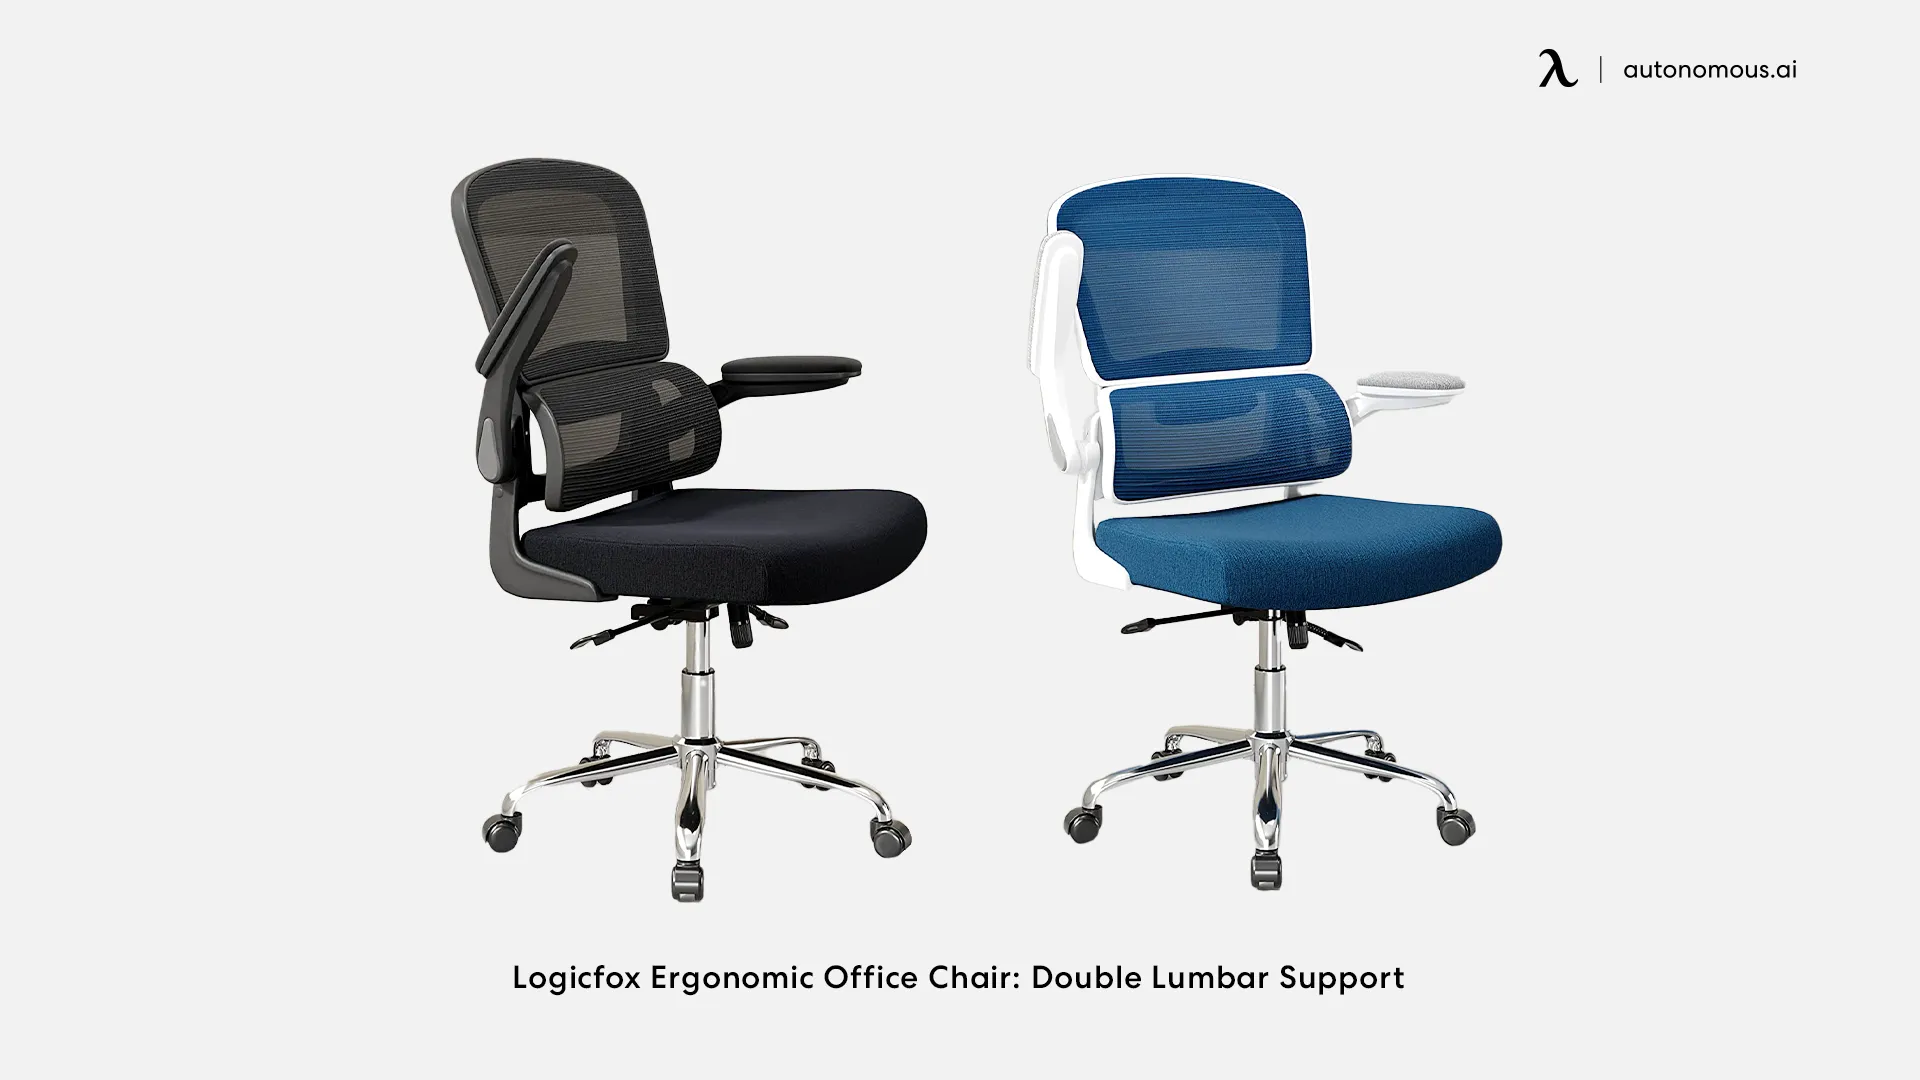 Ergonomic Chairs with Flip-up Arms for Cross-Legged Sitting